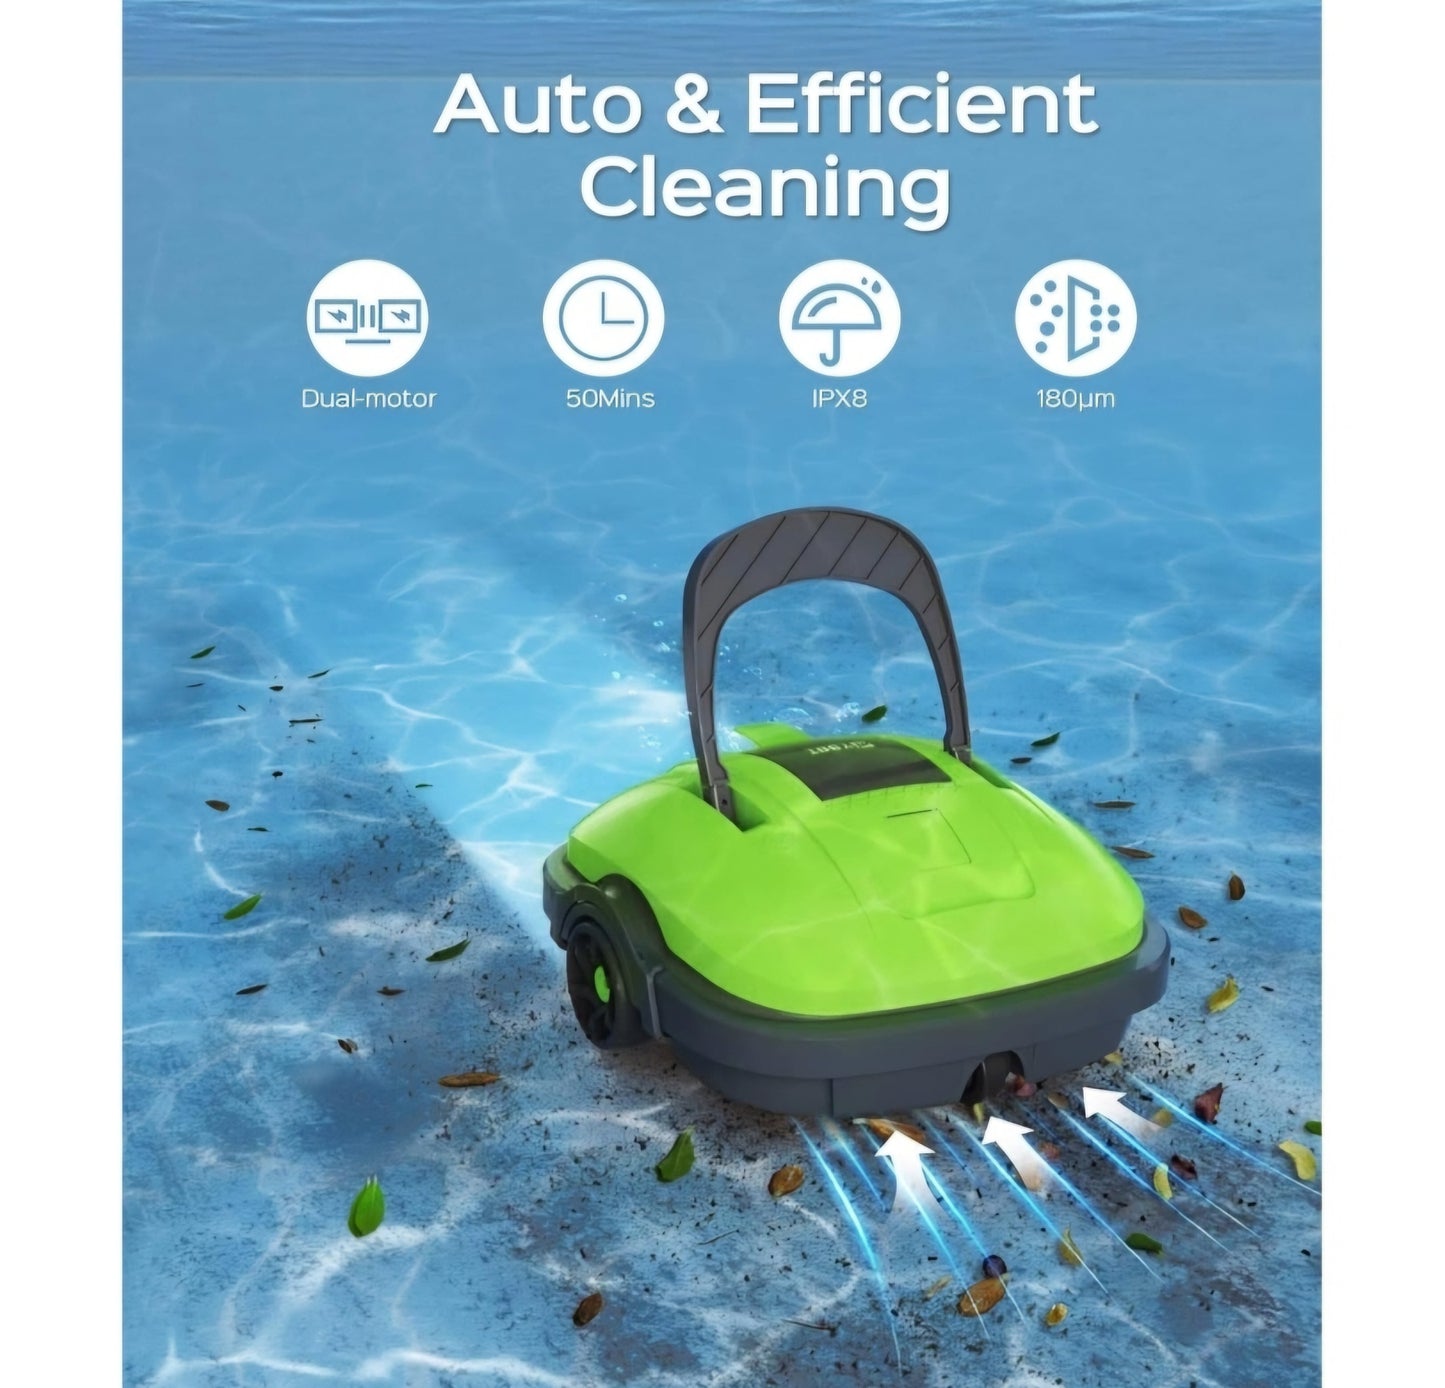 WYBOT Cordless Robotic Pool Cleaner - Sparkling Pool Vacuum Cleaner